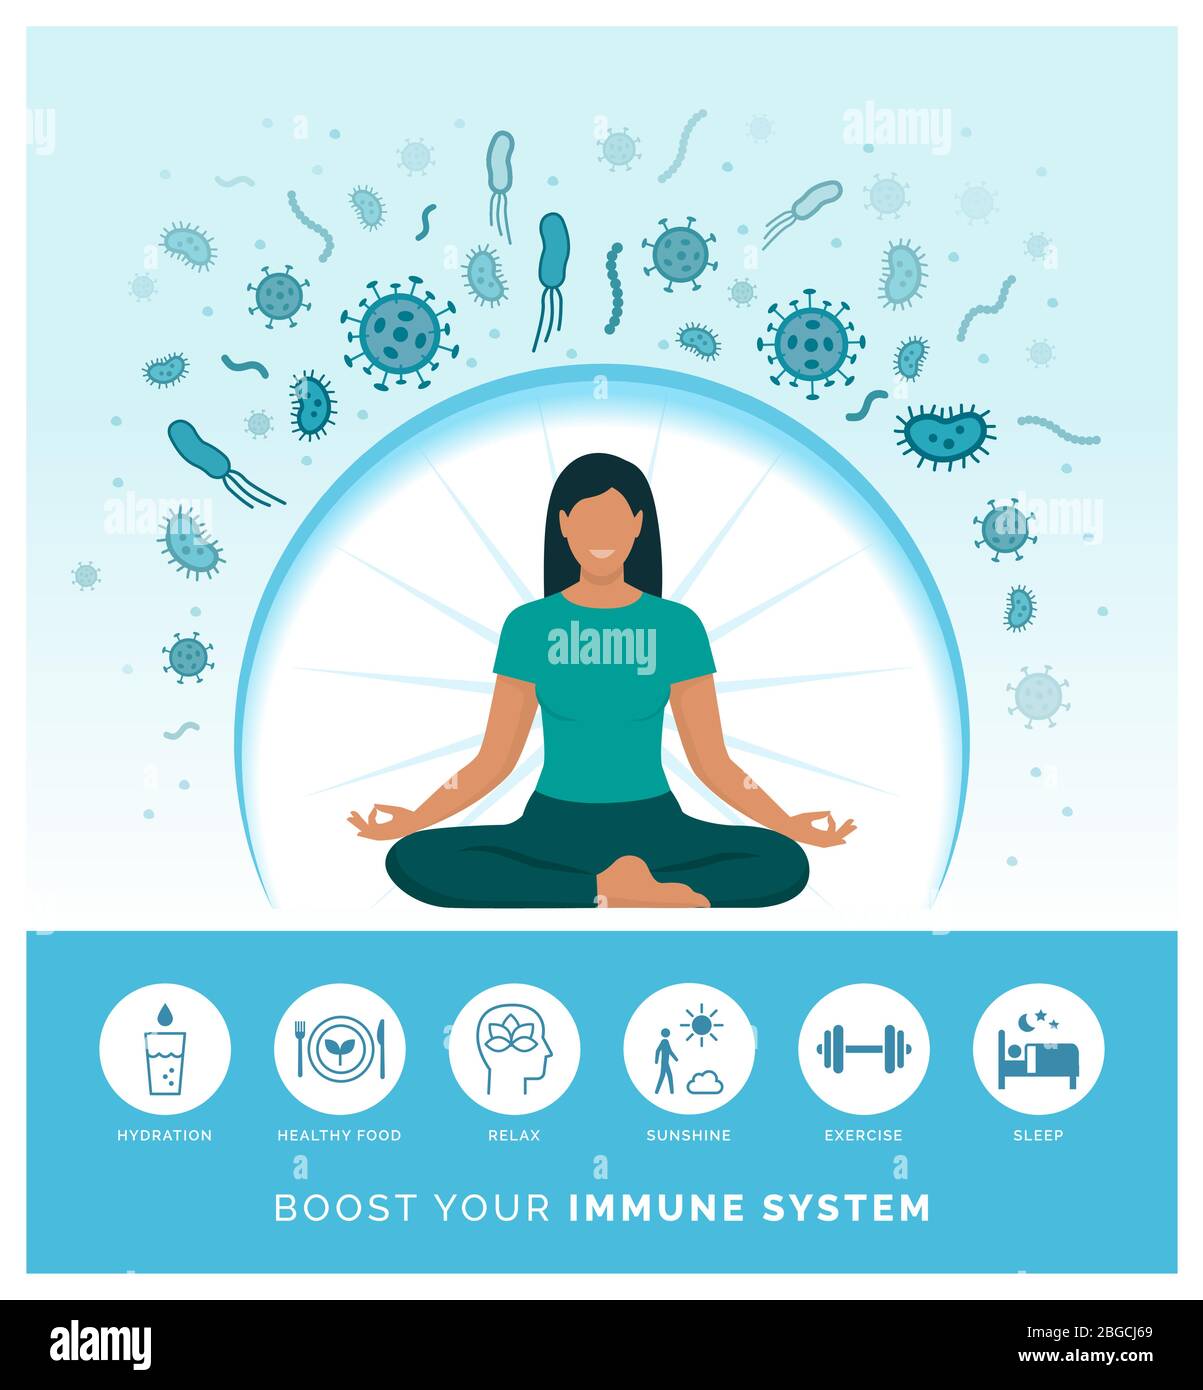 Woman boosting her immune system naturally and defeating viruses, she is following a healthy lifestyle and practicing meditation Stock Vector